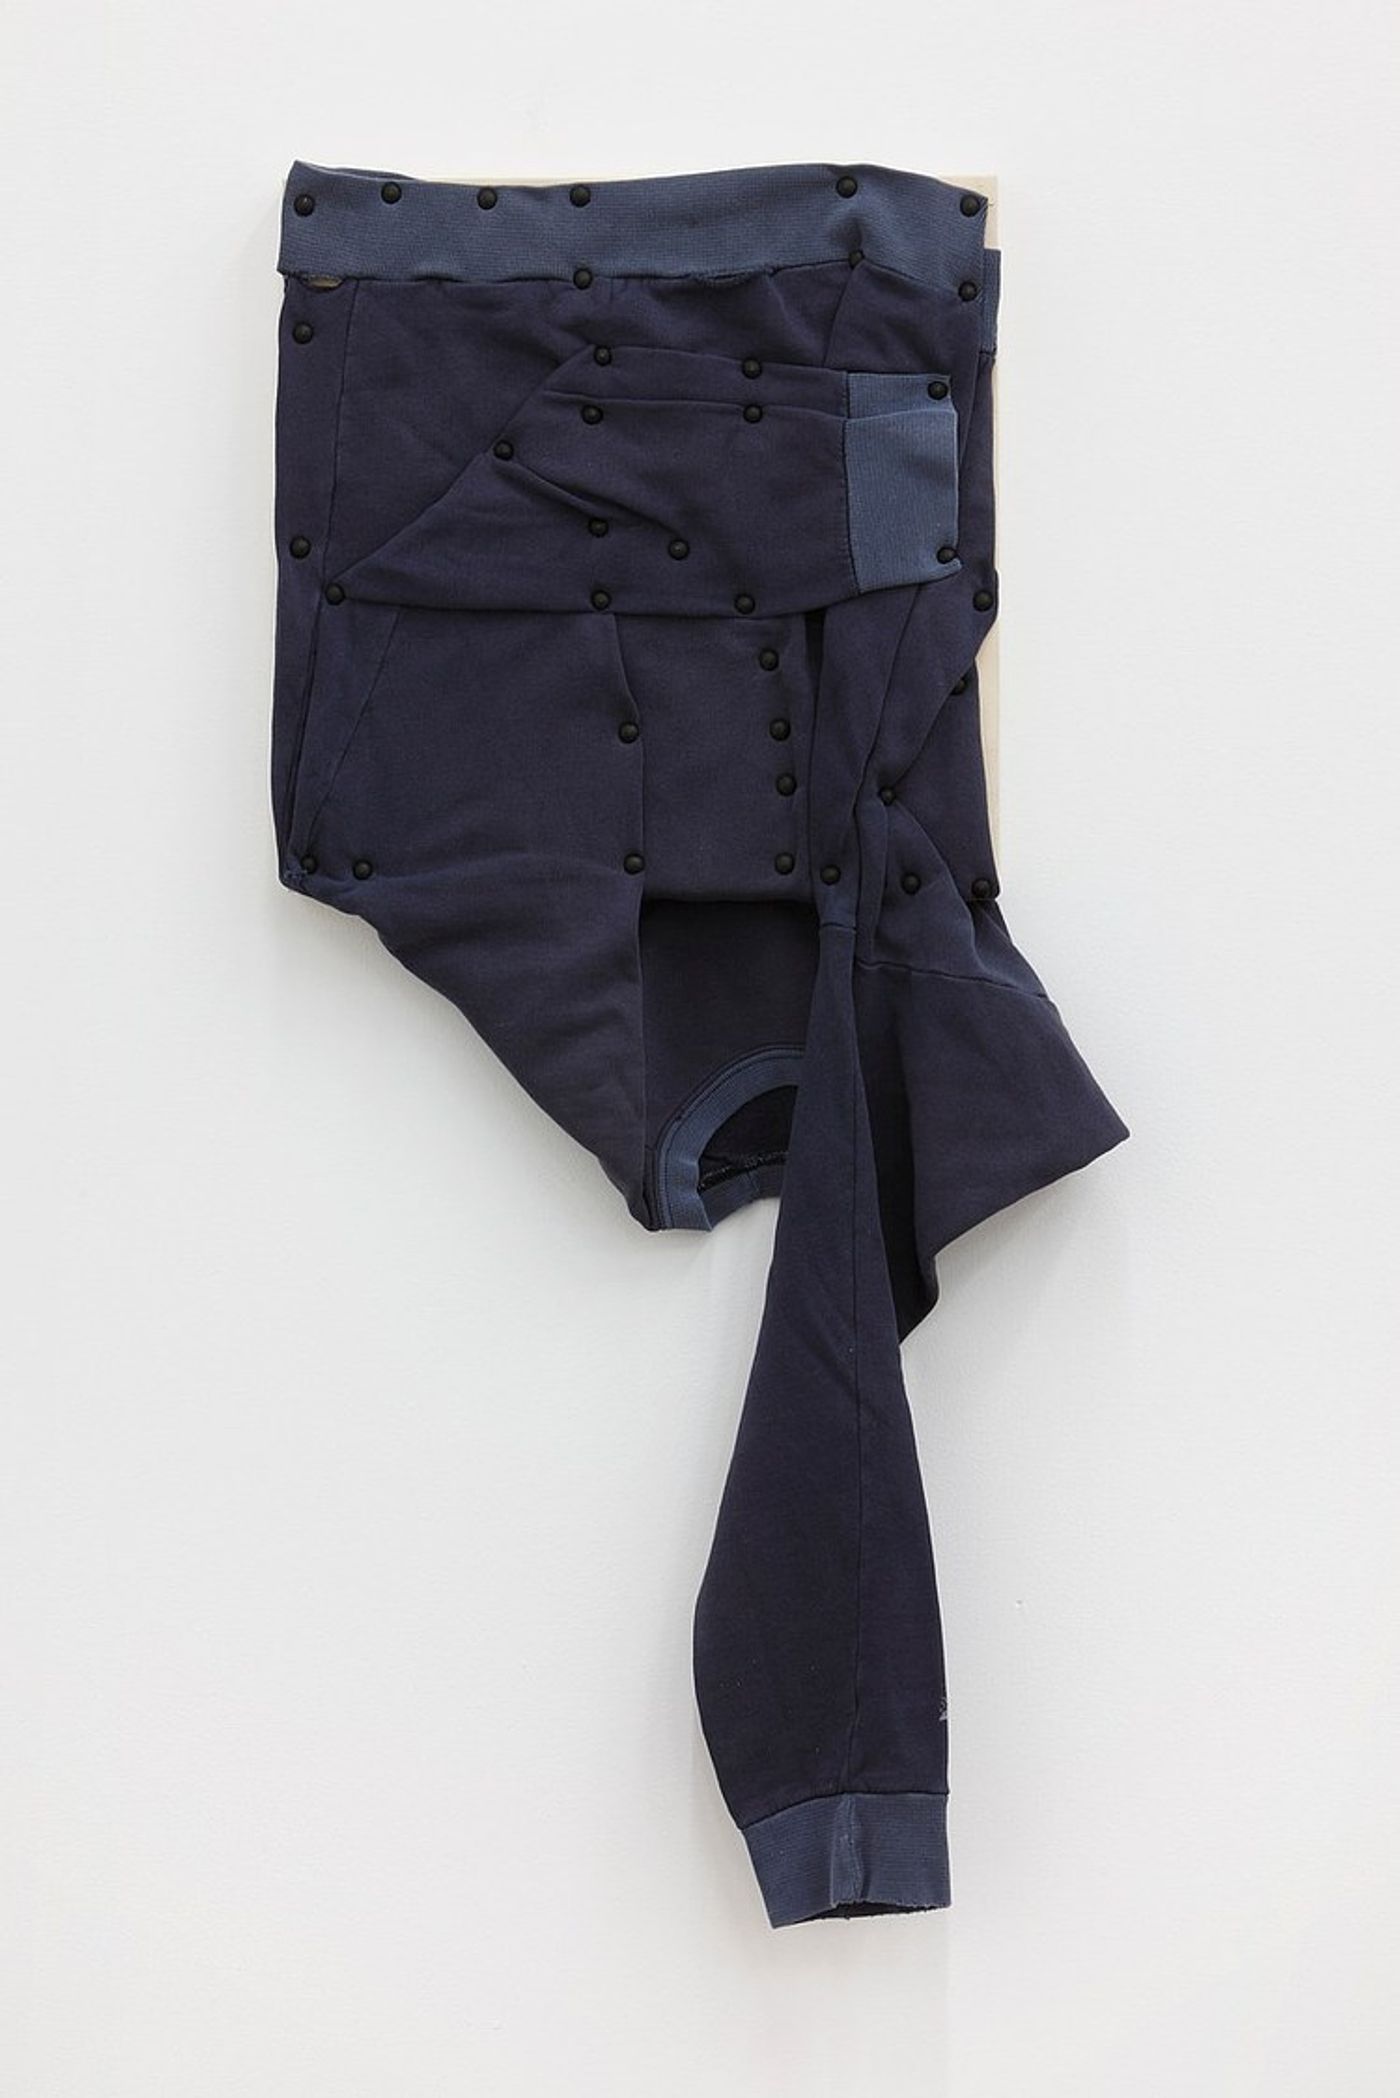 Tom Burr, his personal effects (long sleeve, blue), 2012. Men's sweatshirt, upholstery tacks and plywood, 37 x 15 in (94 x 38.1 cm).